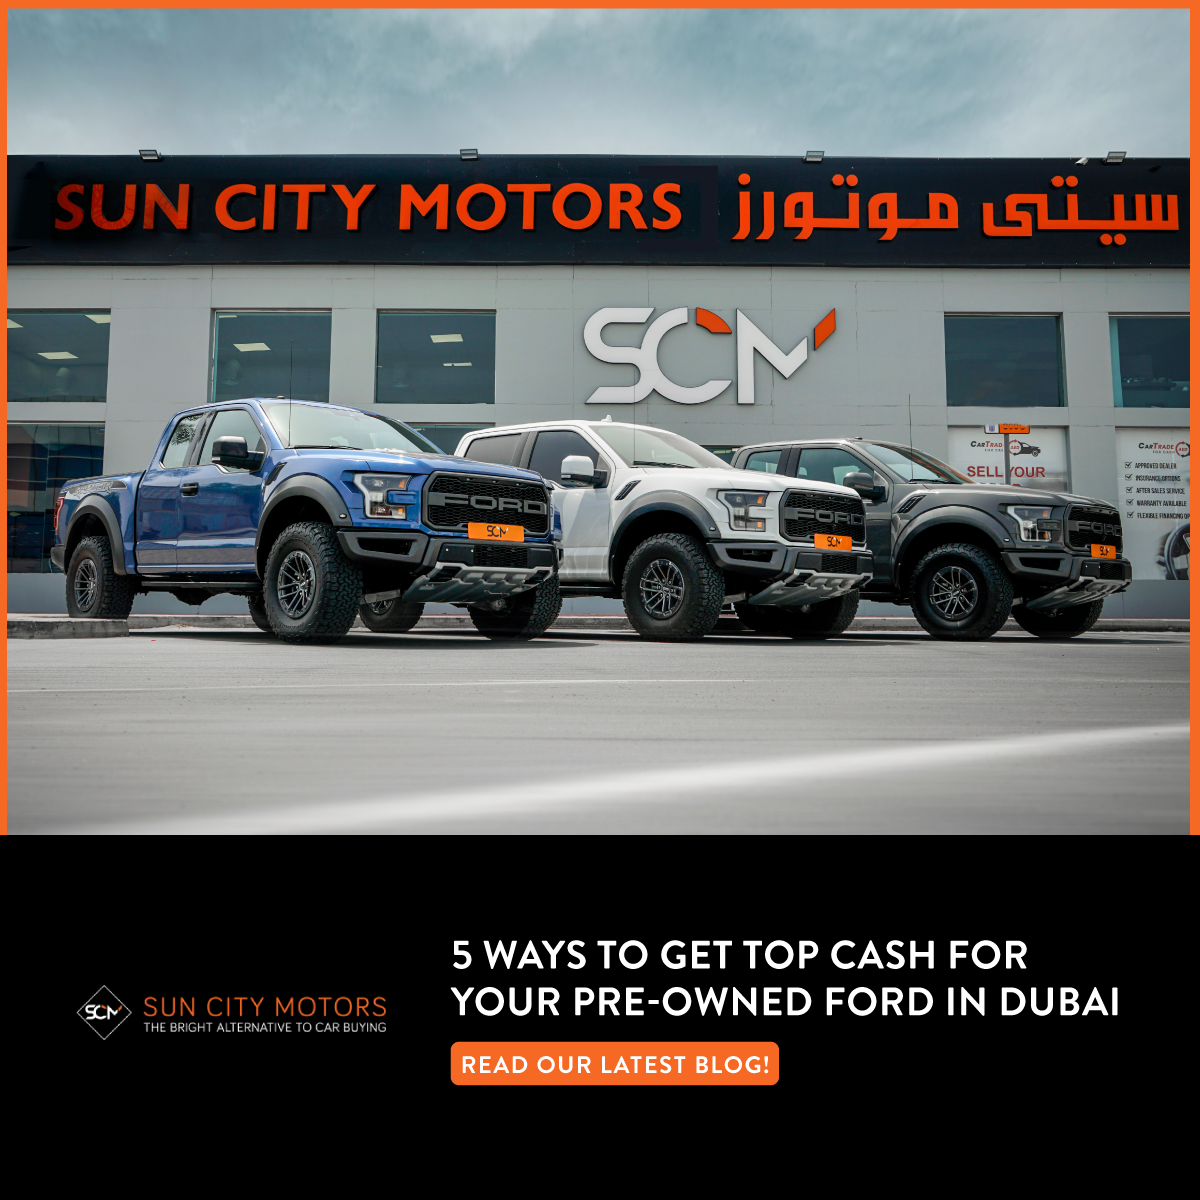 5 Ways to Get Top Cash for Your Pre-owned Ford in Dubai